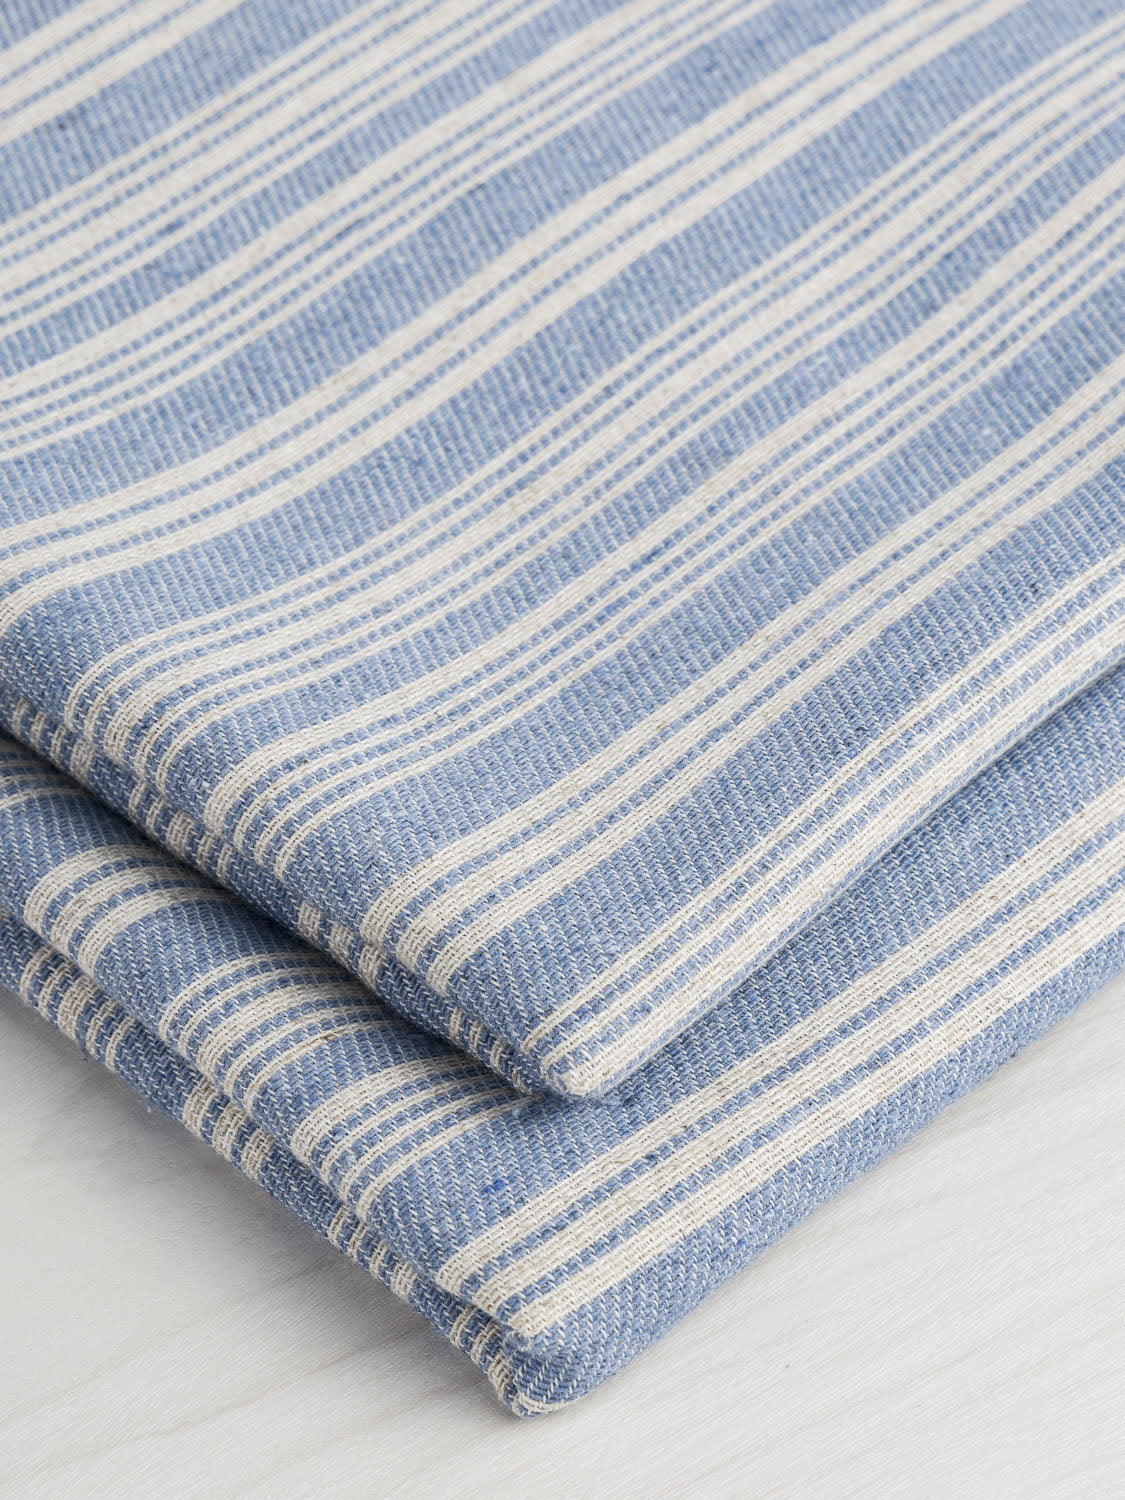 Organic & recycled cotton dry mop cloth.